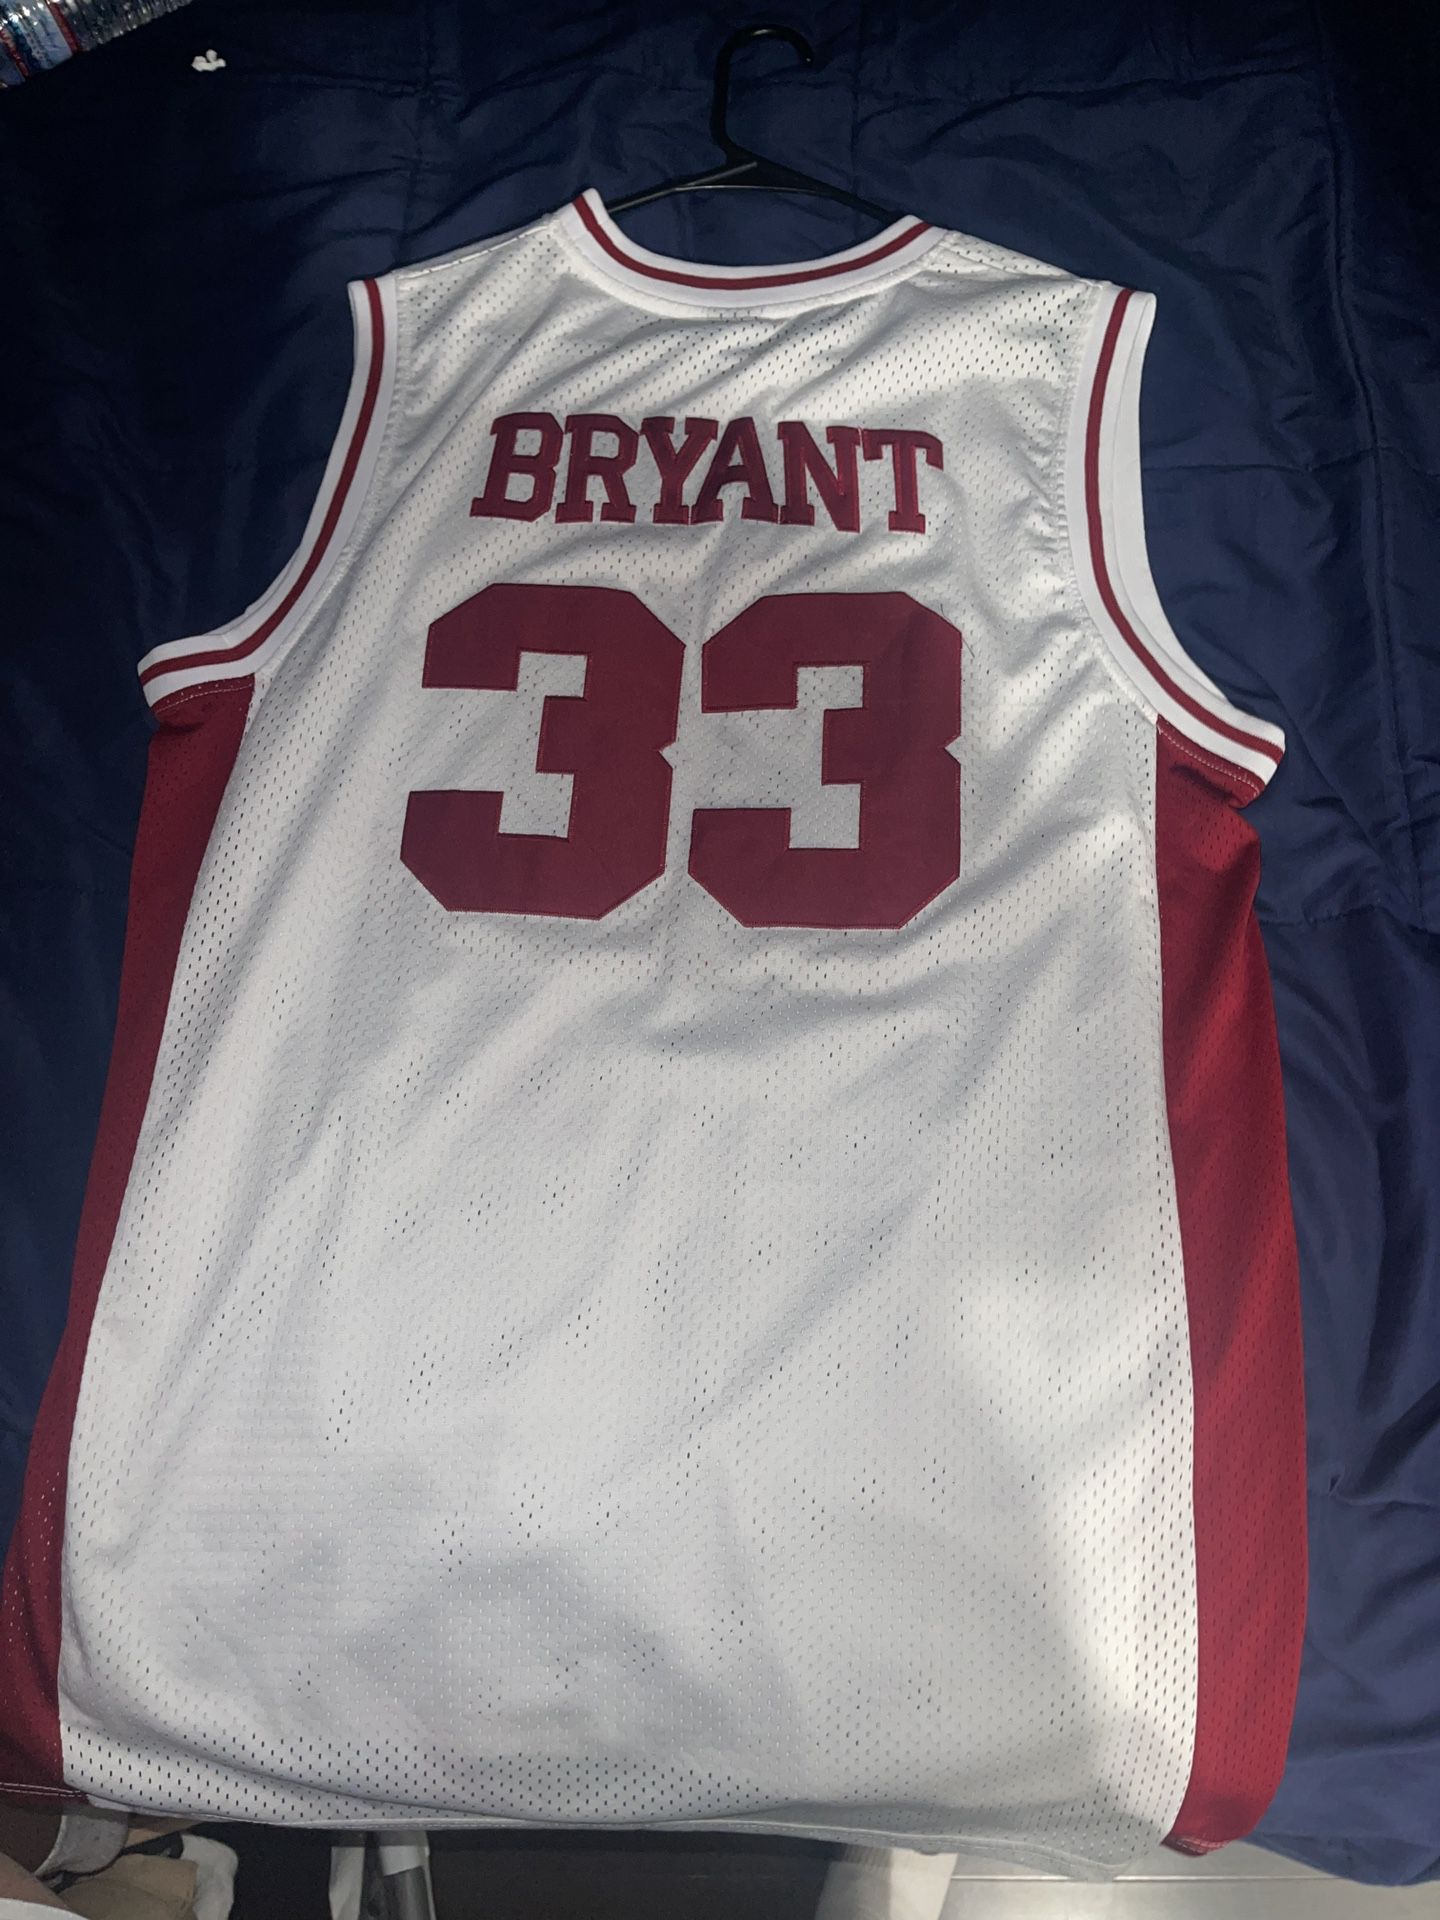 Vintage Champion Kobe Bryant Jersey for Sale in Cypress, CA - OfferUp